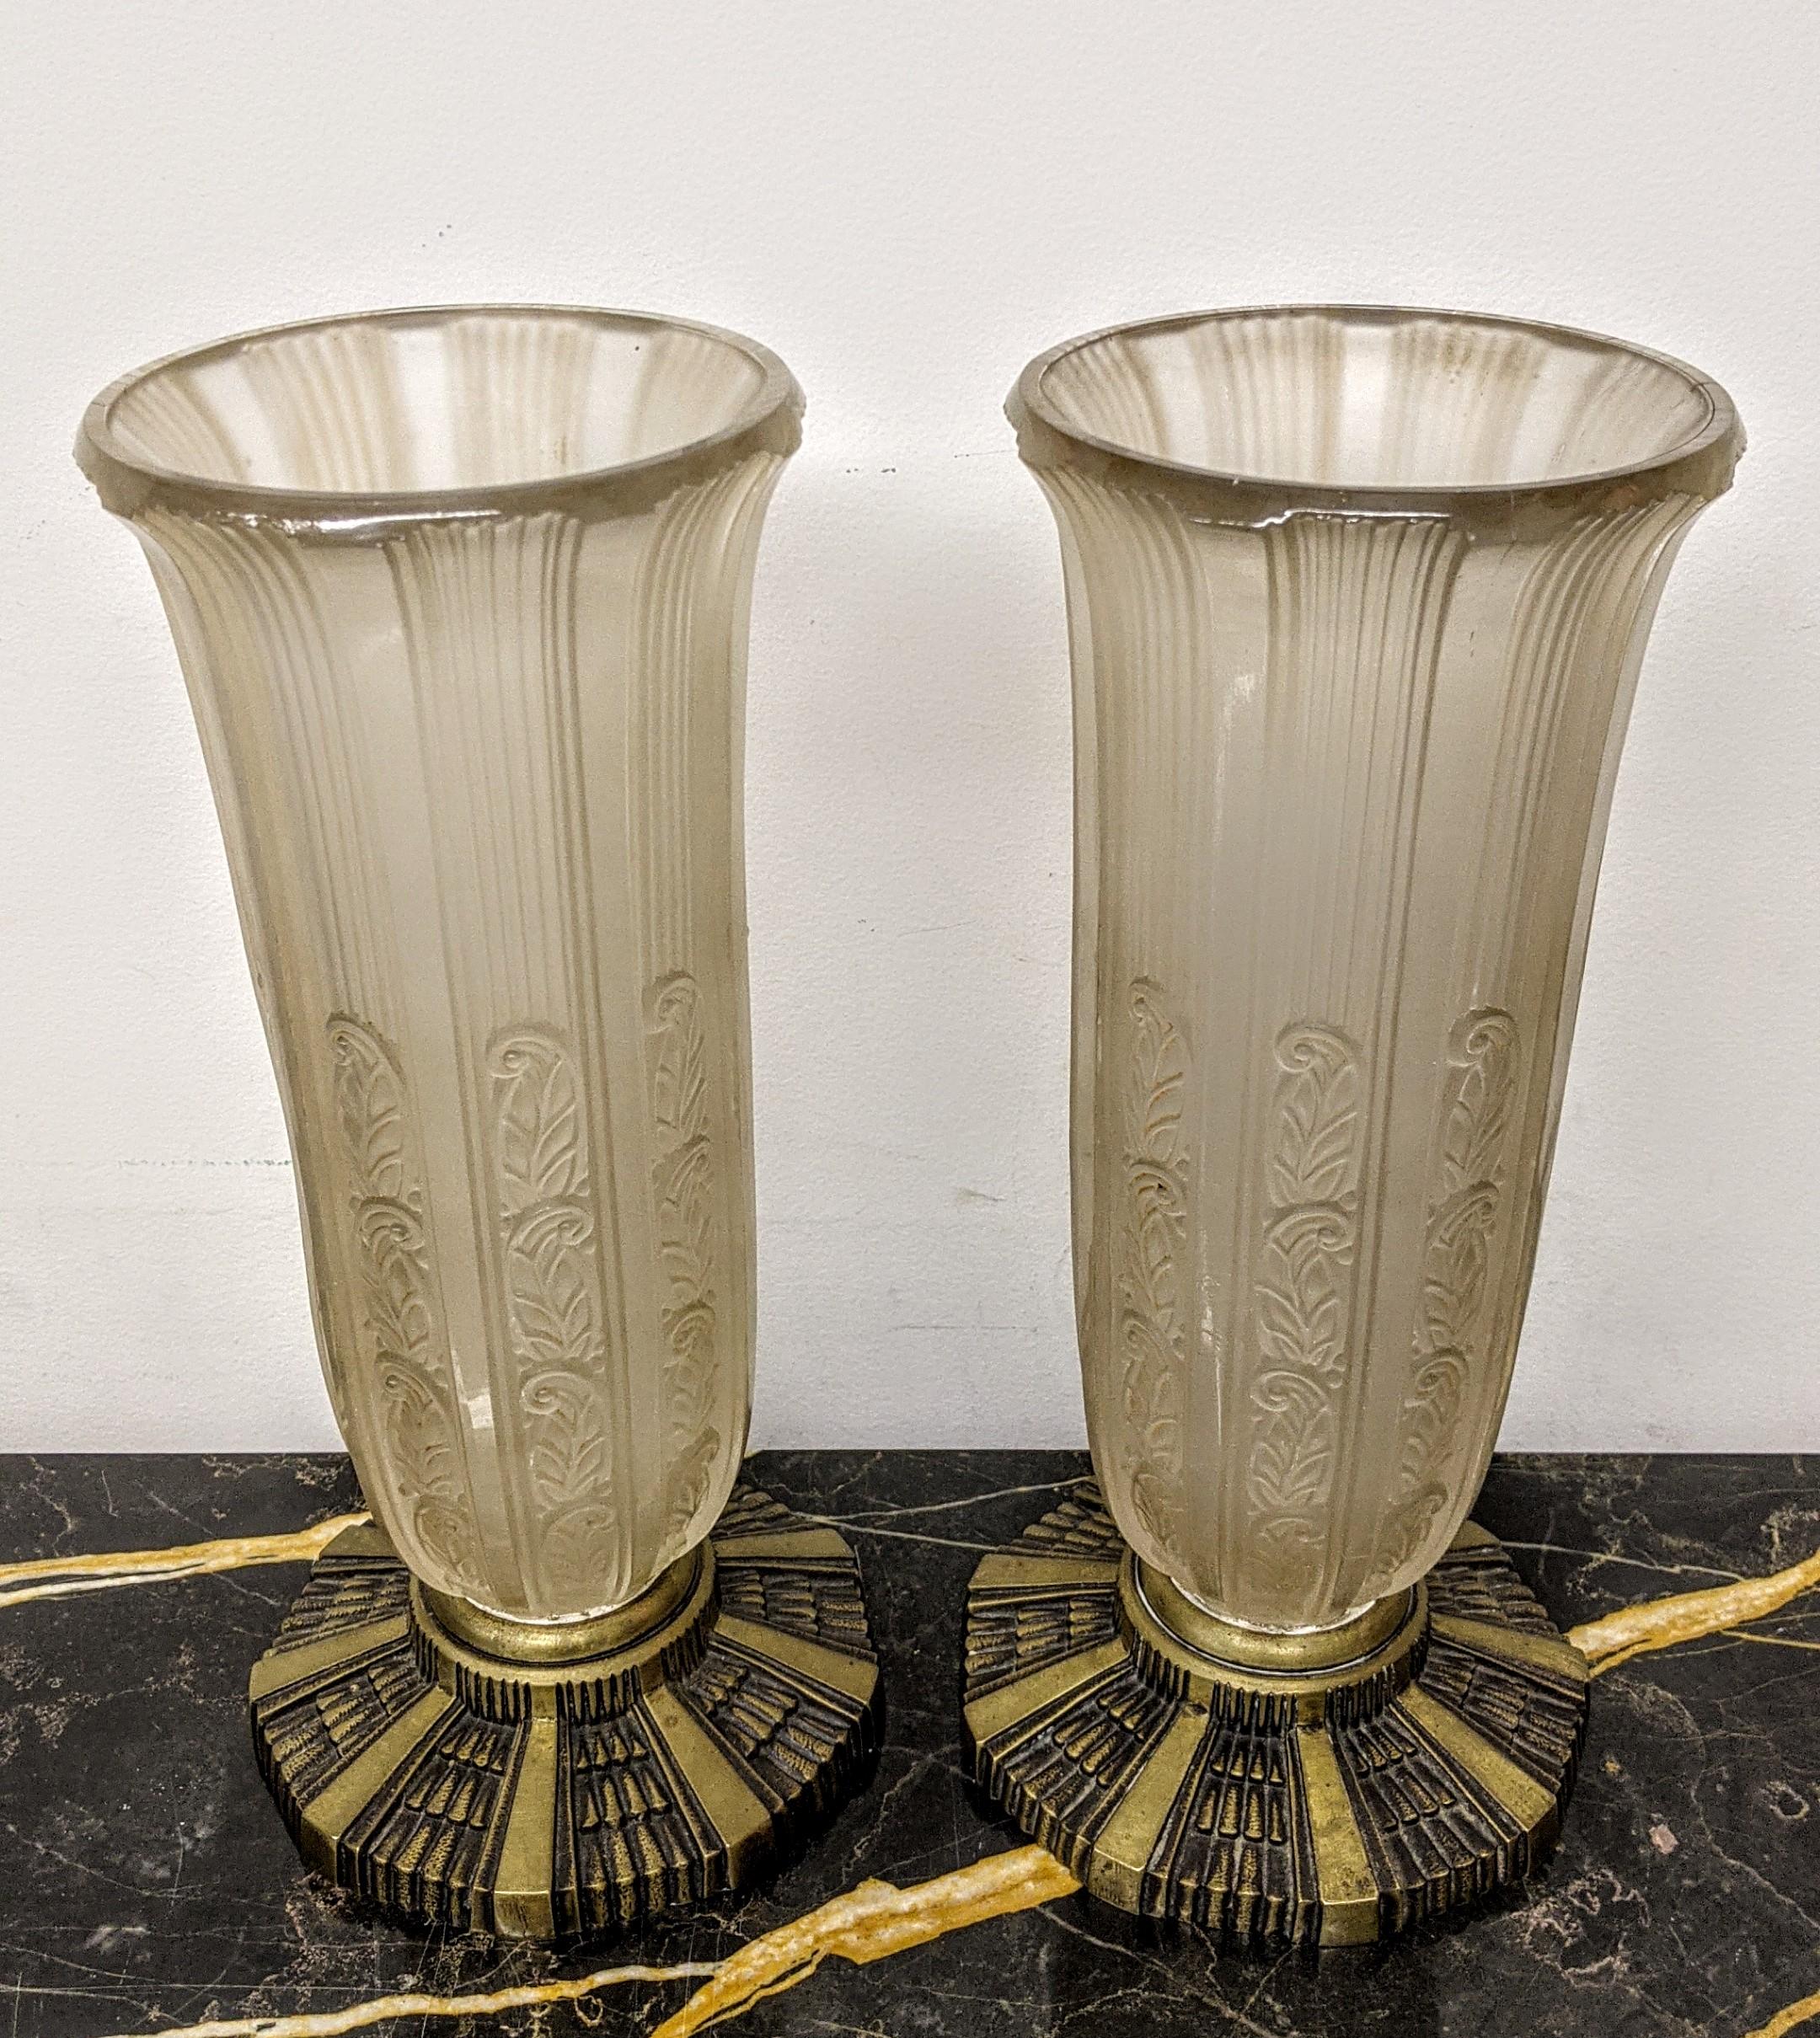 Stunning pair of French Art Deco vases with flower motif throughout with decorative bronze base by Hettier and Vincent. Can be turned into a pair of table lamps with an additional charge. We are the rare source that specializes exclusively in French